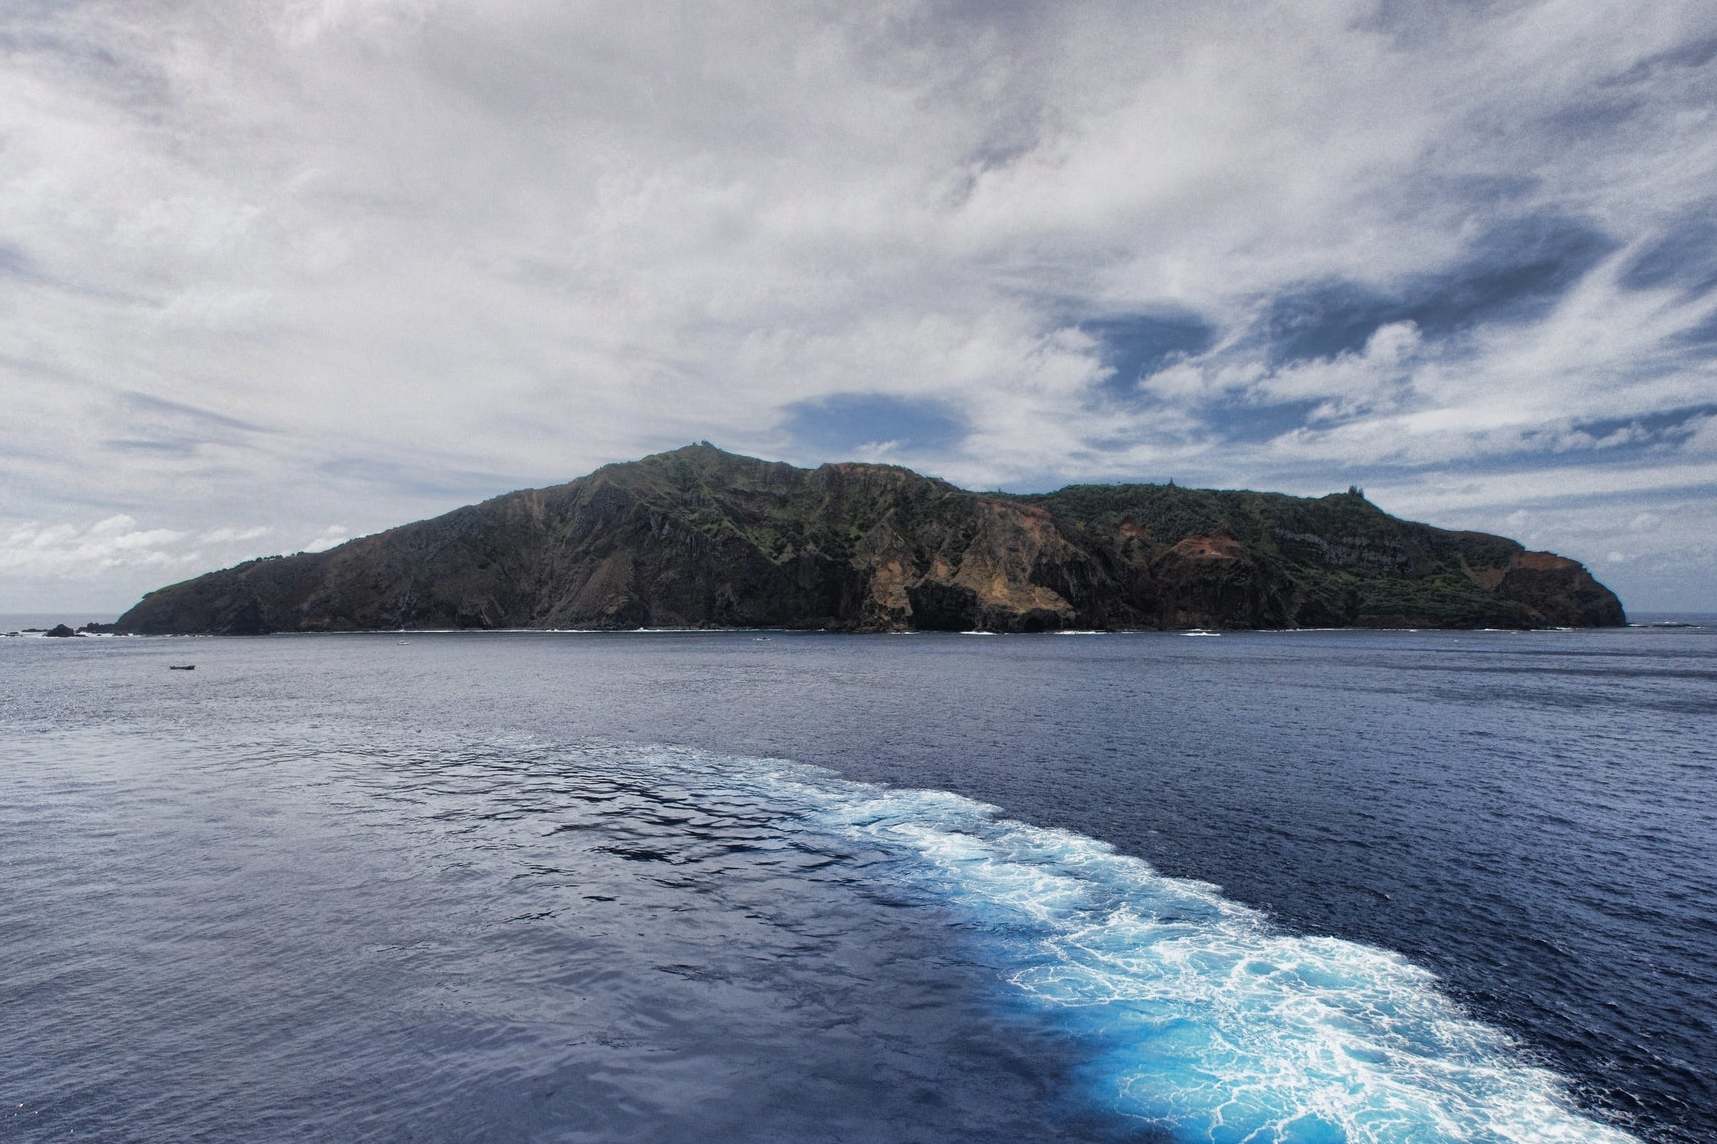 Sailing away from Pitcairn Island, the final stop for the Bounty mutineers